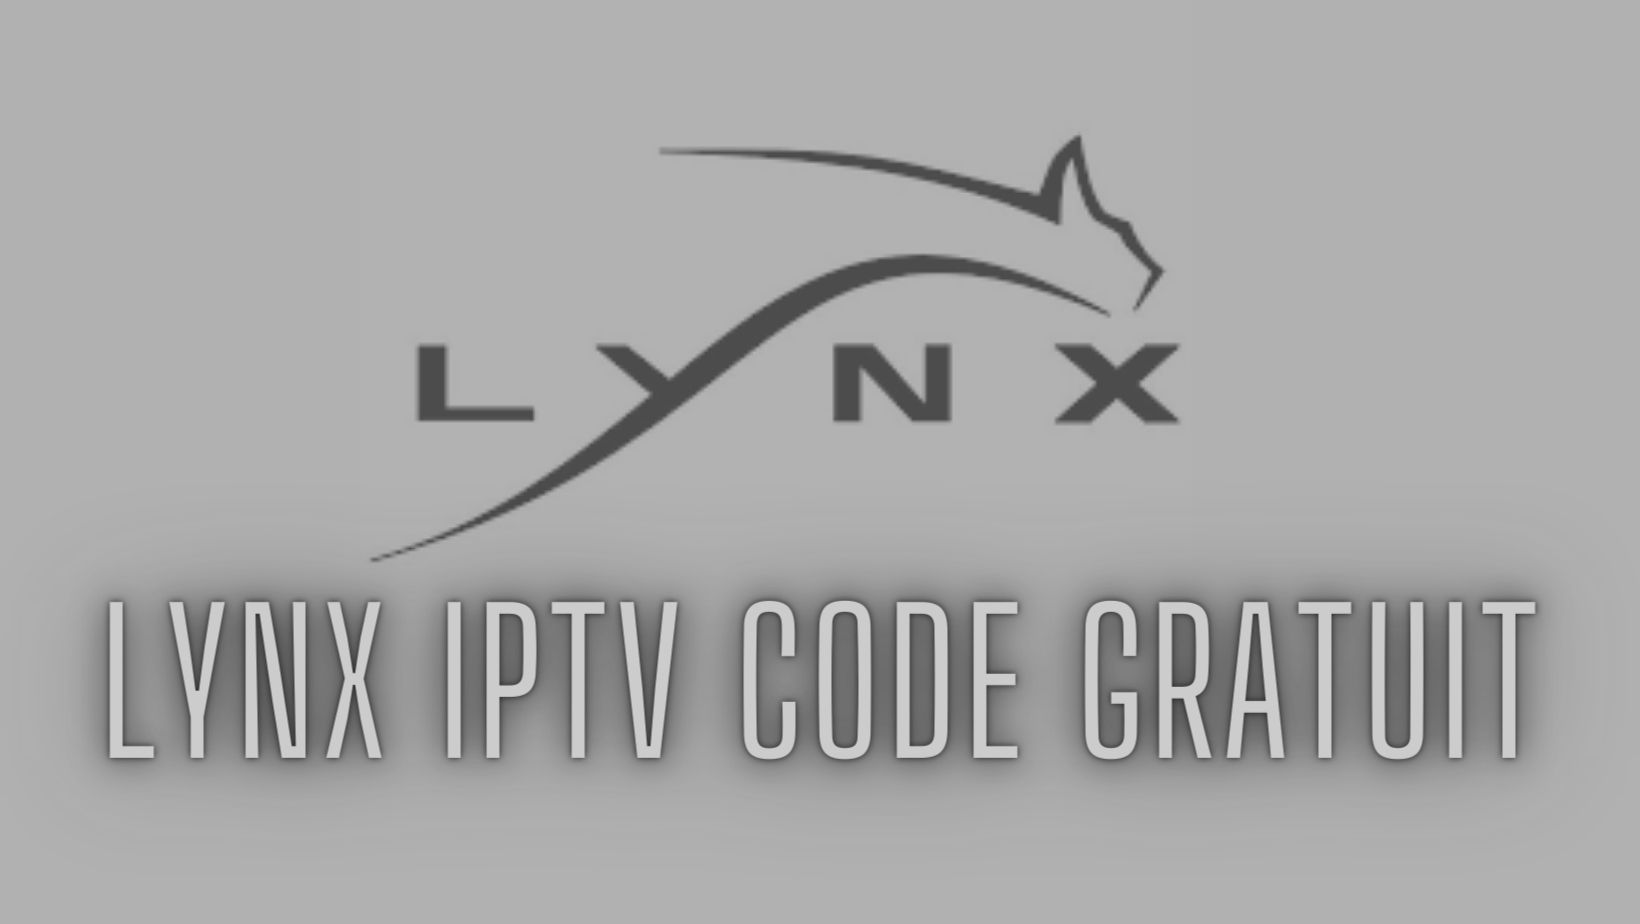 You are currently viewing lynx iptv code gratuit